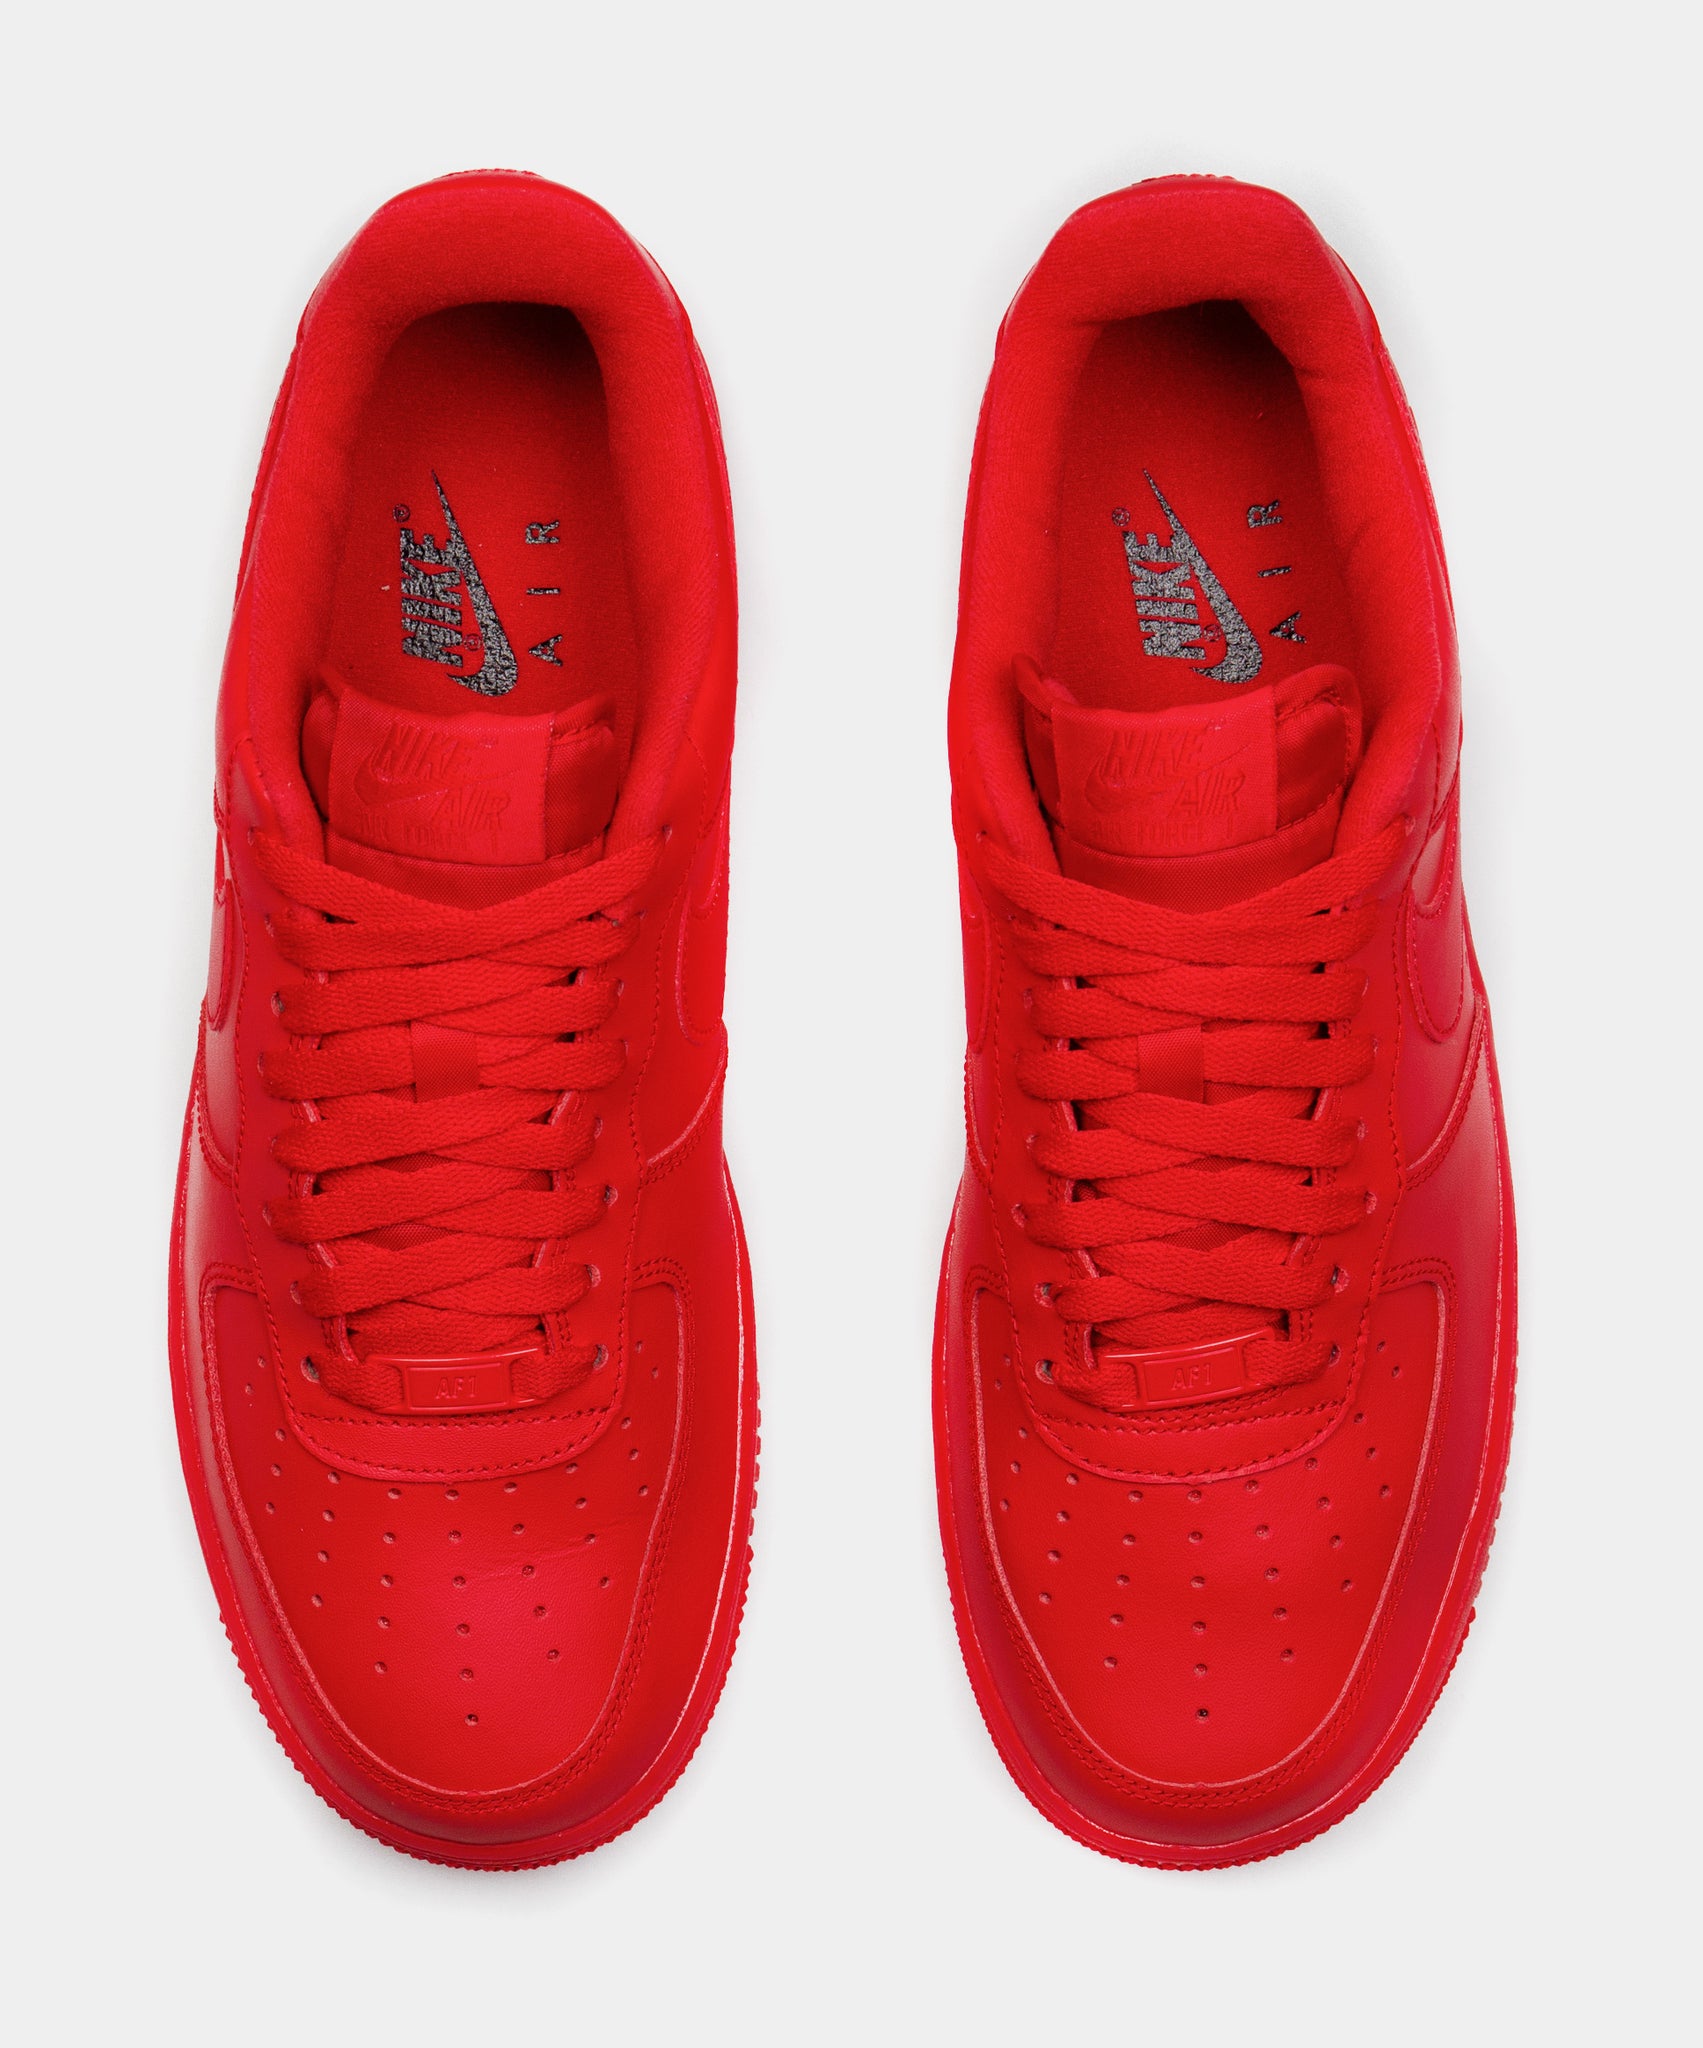 red air force 1 shoe palace